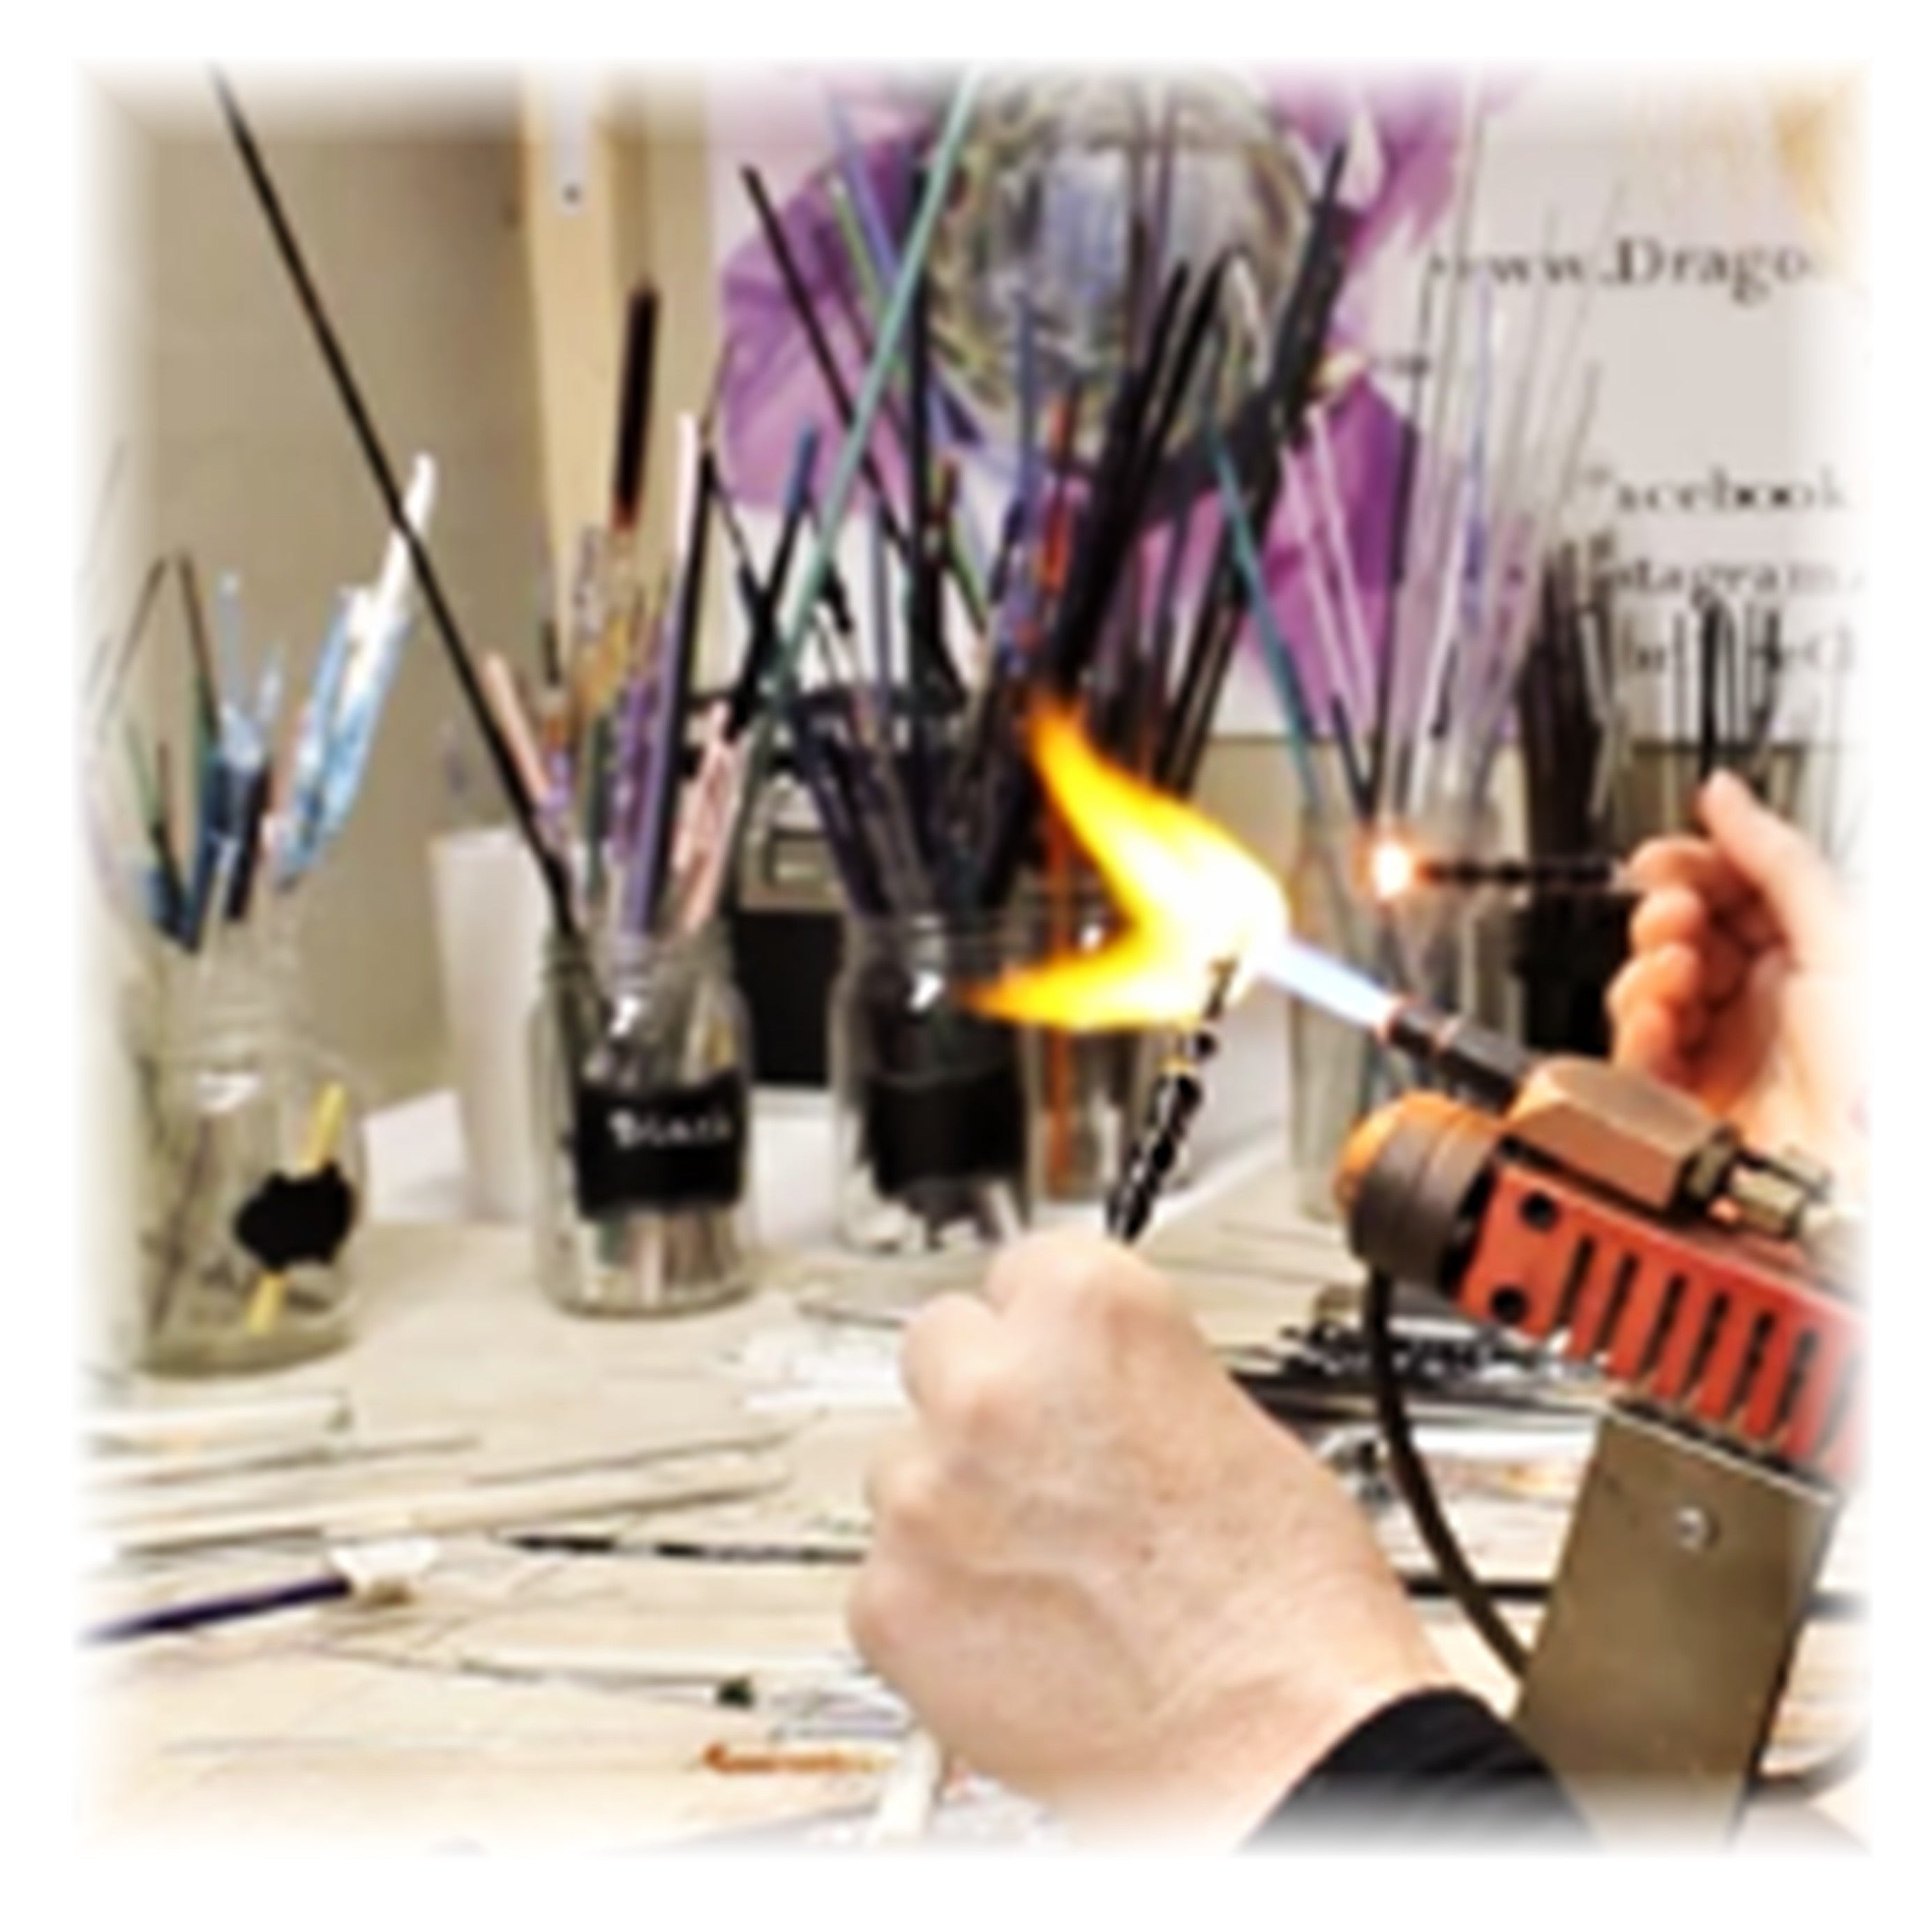 Showing a lampworking torch with the fire on and a glass rods in the flame. Getting ready to blow glass